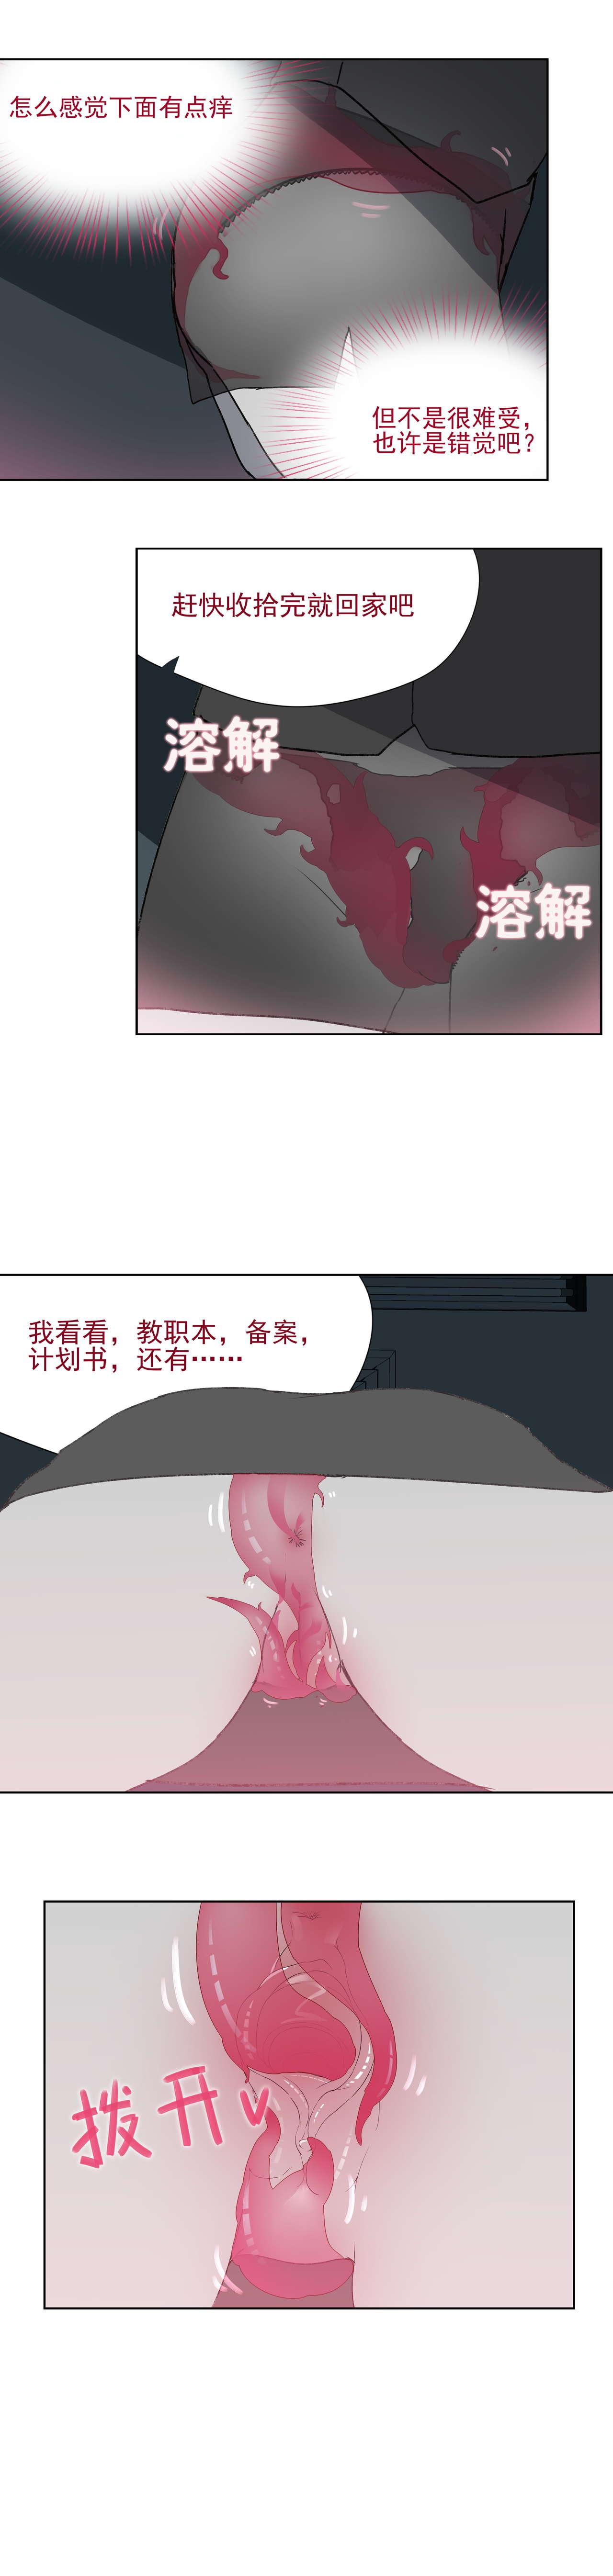 Dando 寄生之恋 Tentacle love - Original Chat - Page 5